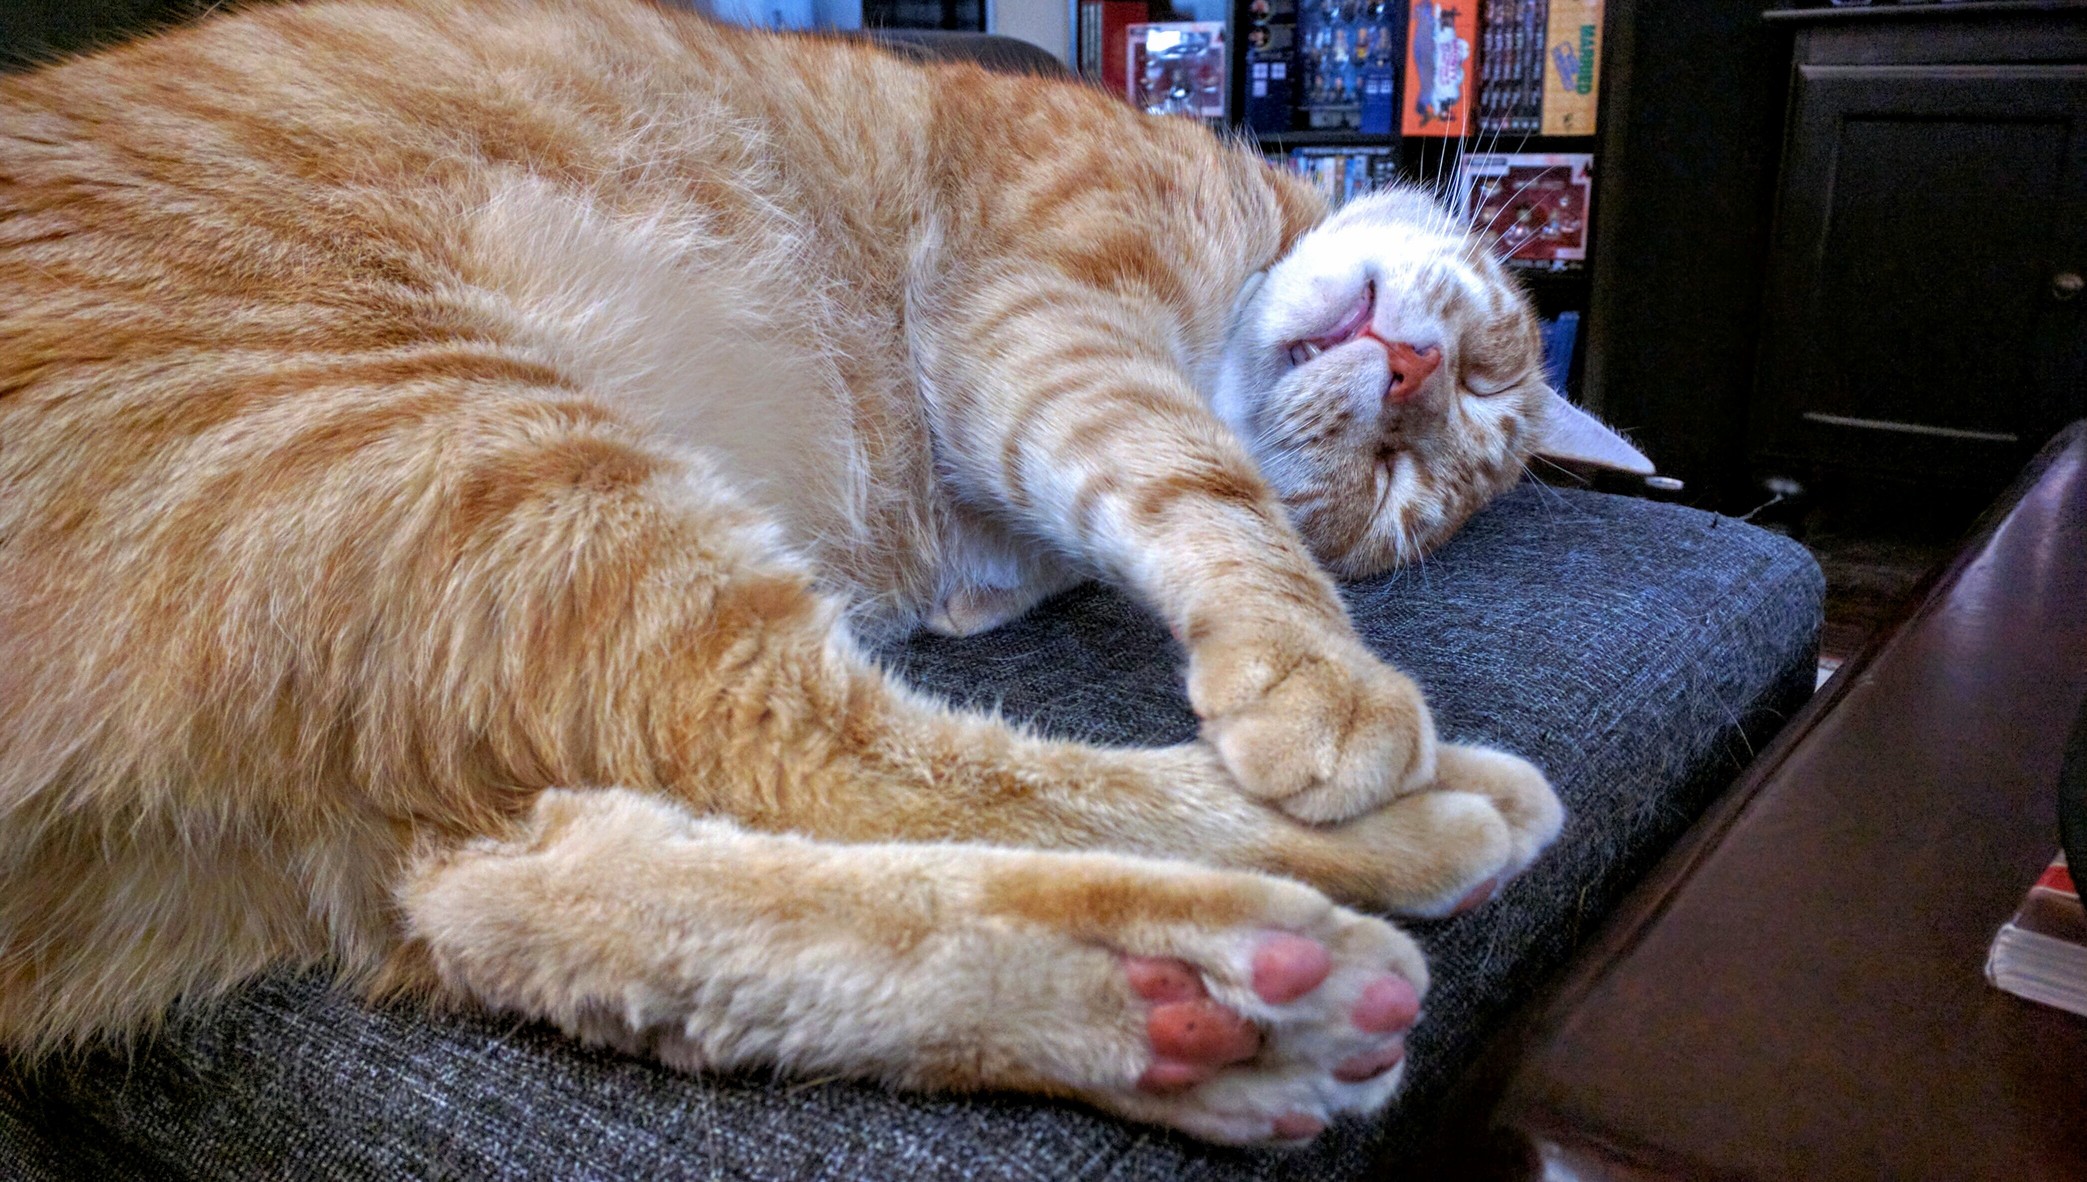 Ginger beans with a side of blep. x post rjellybeantoes